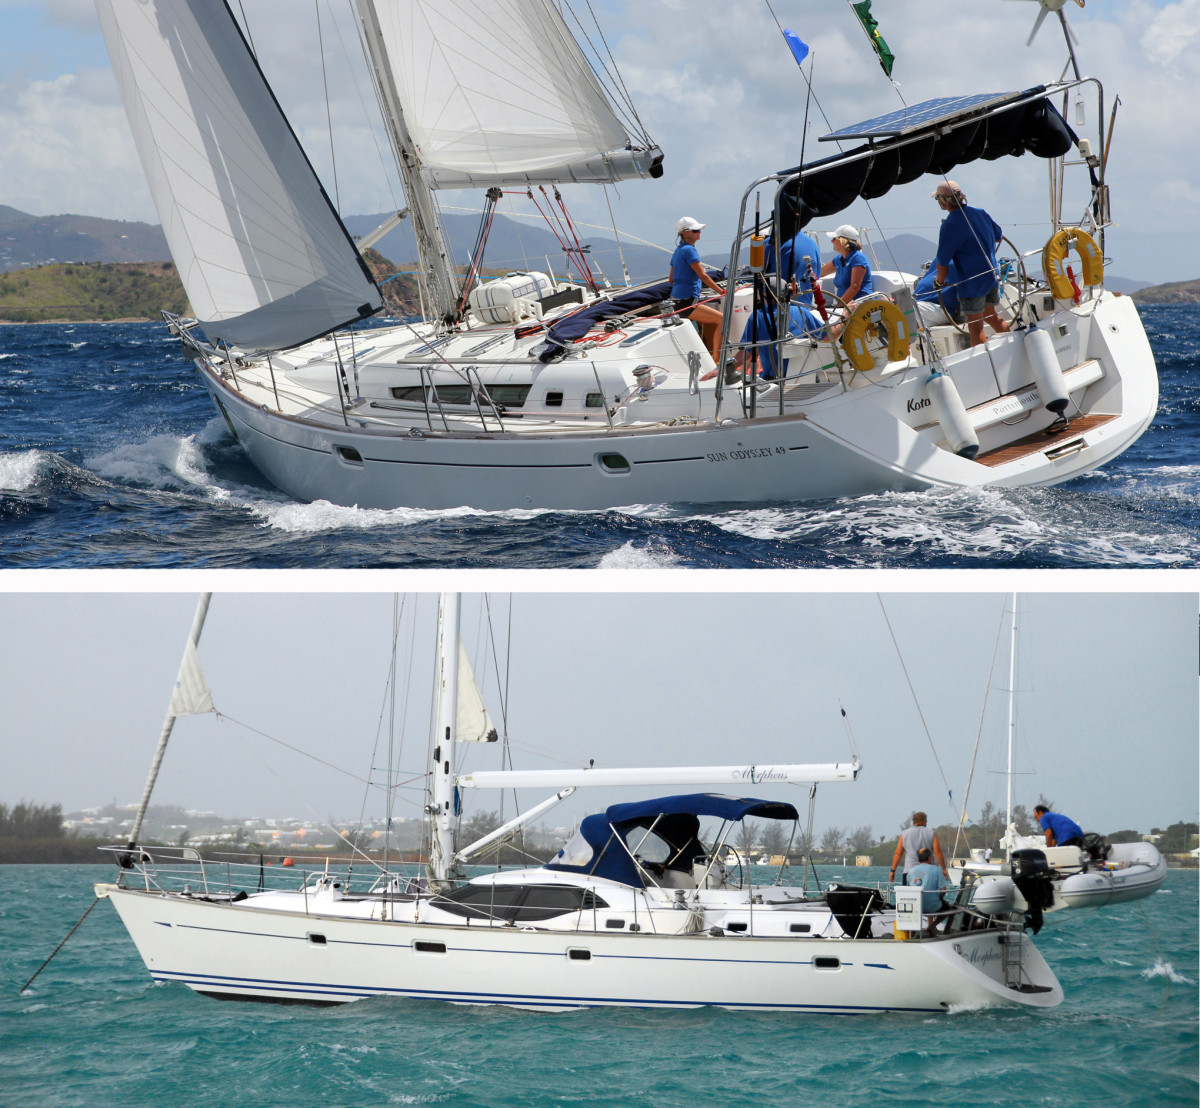 Top: Many mass-production fin-and-spade boats make capable bluewater cruisers, but have their limitations. Bottom: Many mass-production fin-and-spade boats make capable bluewater cruisers, but have their limitations